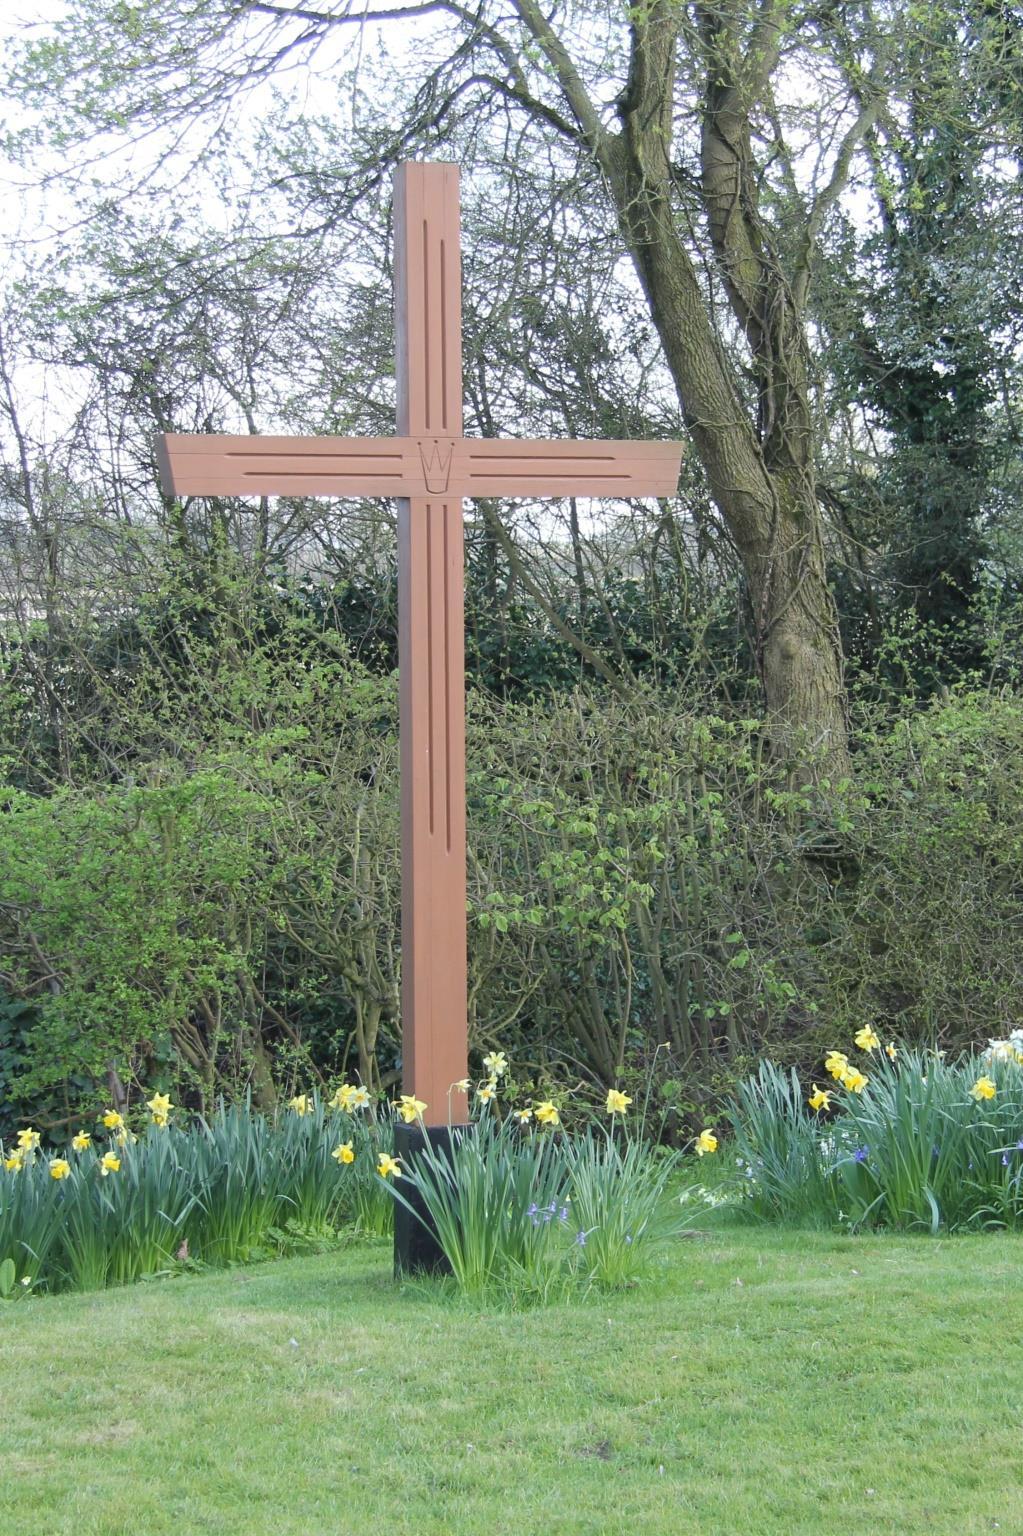 2019 Programme Chelmsford Diocesan House of Retreat Pleshey The House of Retreat, The Street, Pleshey, Chelmsford, Essex CM3 1HA The Diocesan Retreat House for Essex and East London